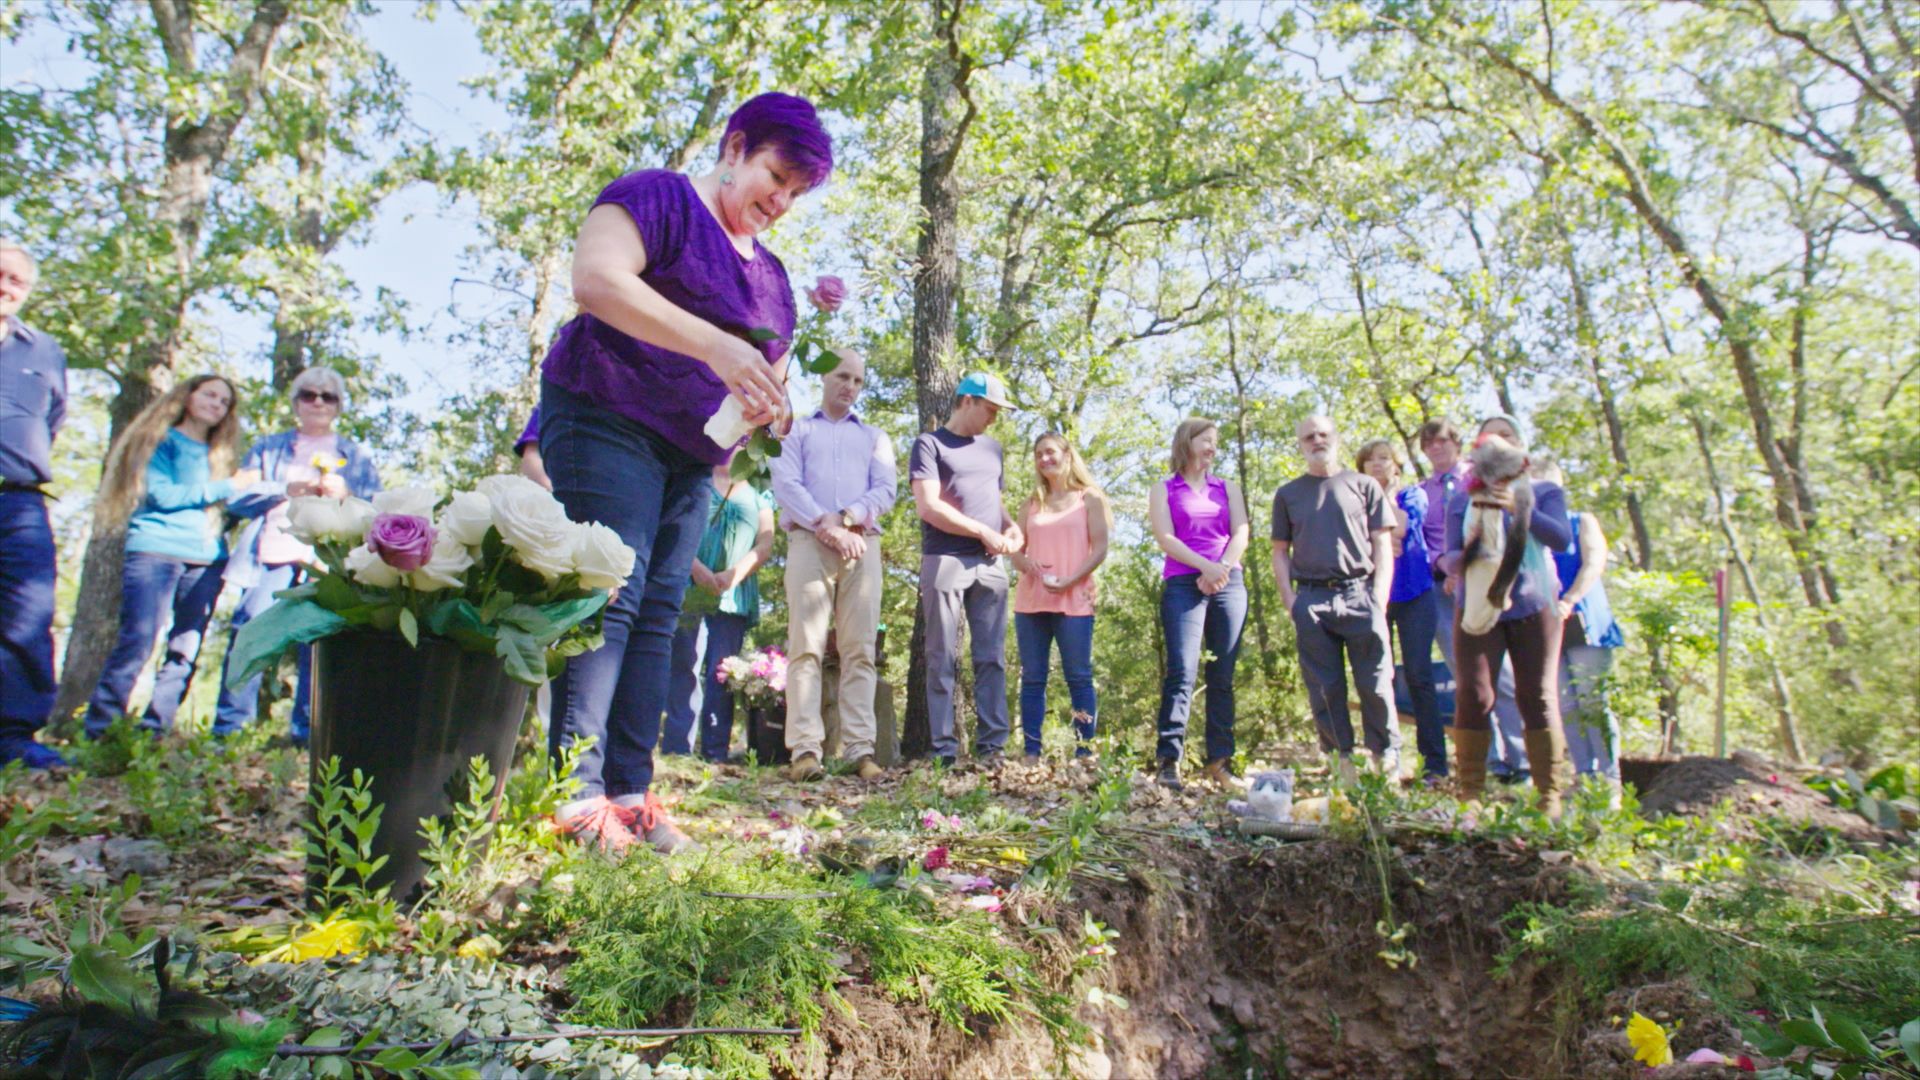 Woman stands over a green burial grave and holds a rose. Several other people stand around the grave.